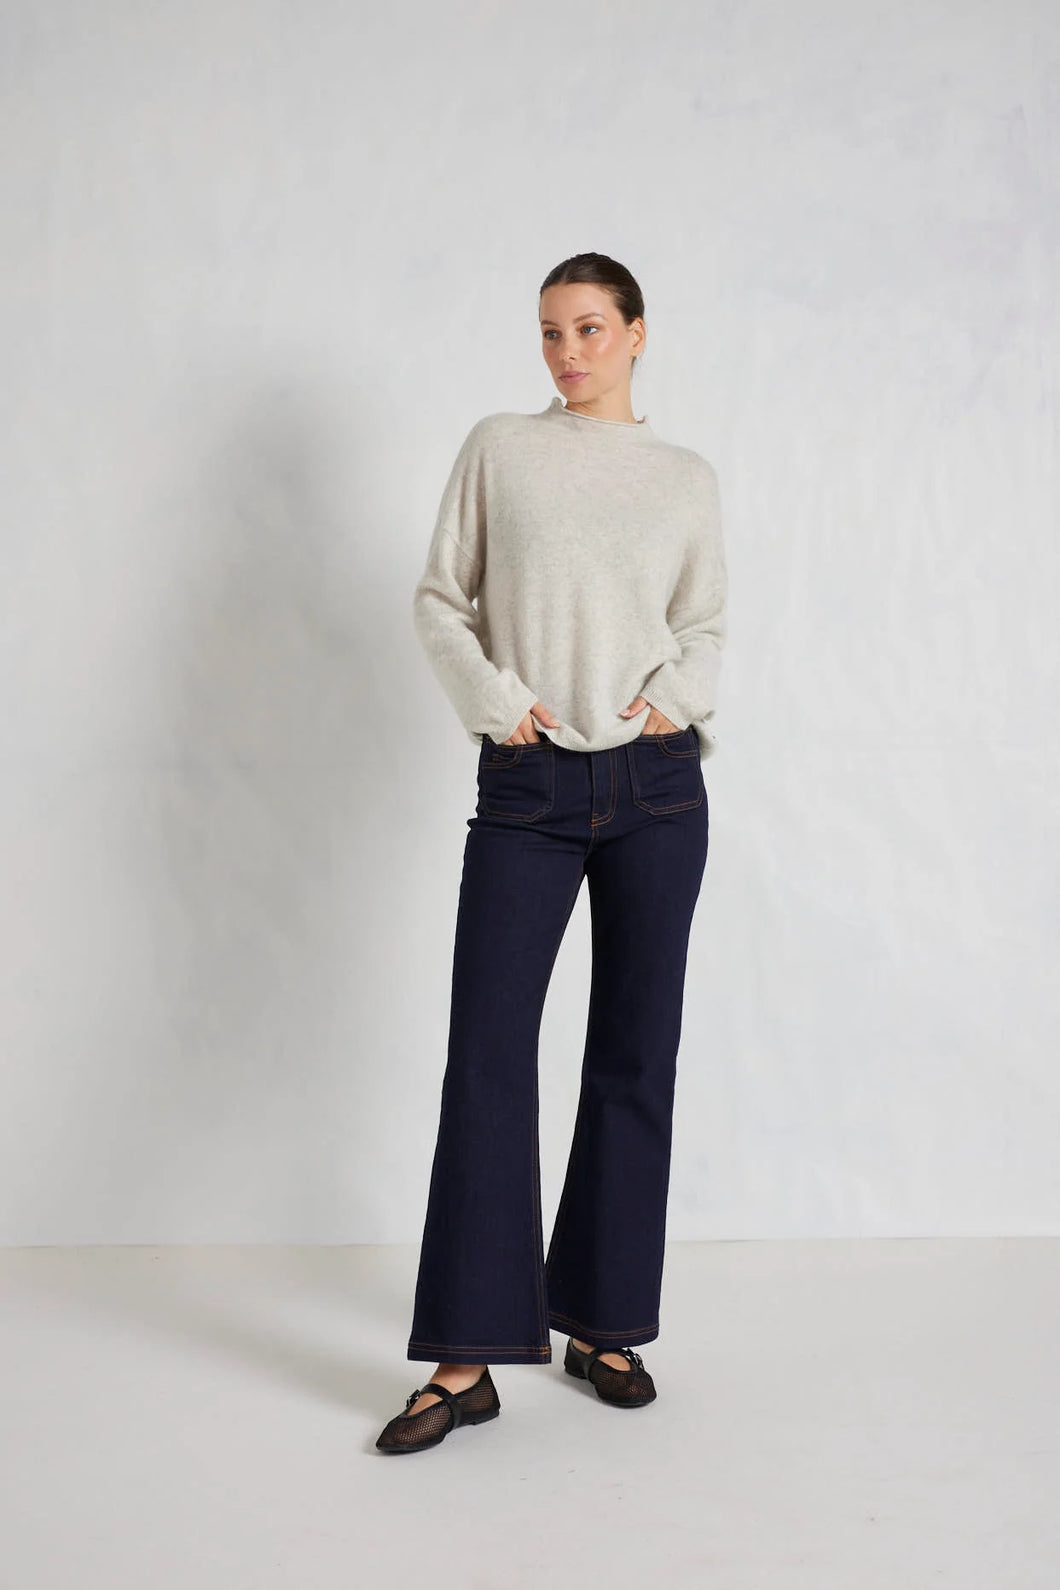 Monet Cashmere Sweater in Foil by Alessandra